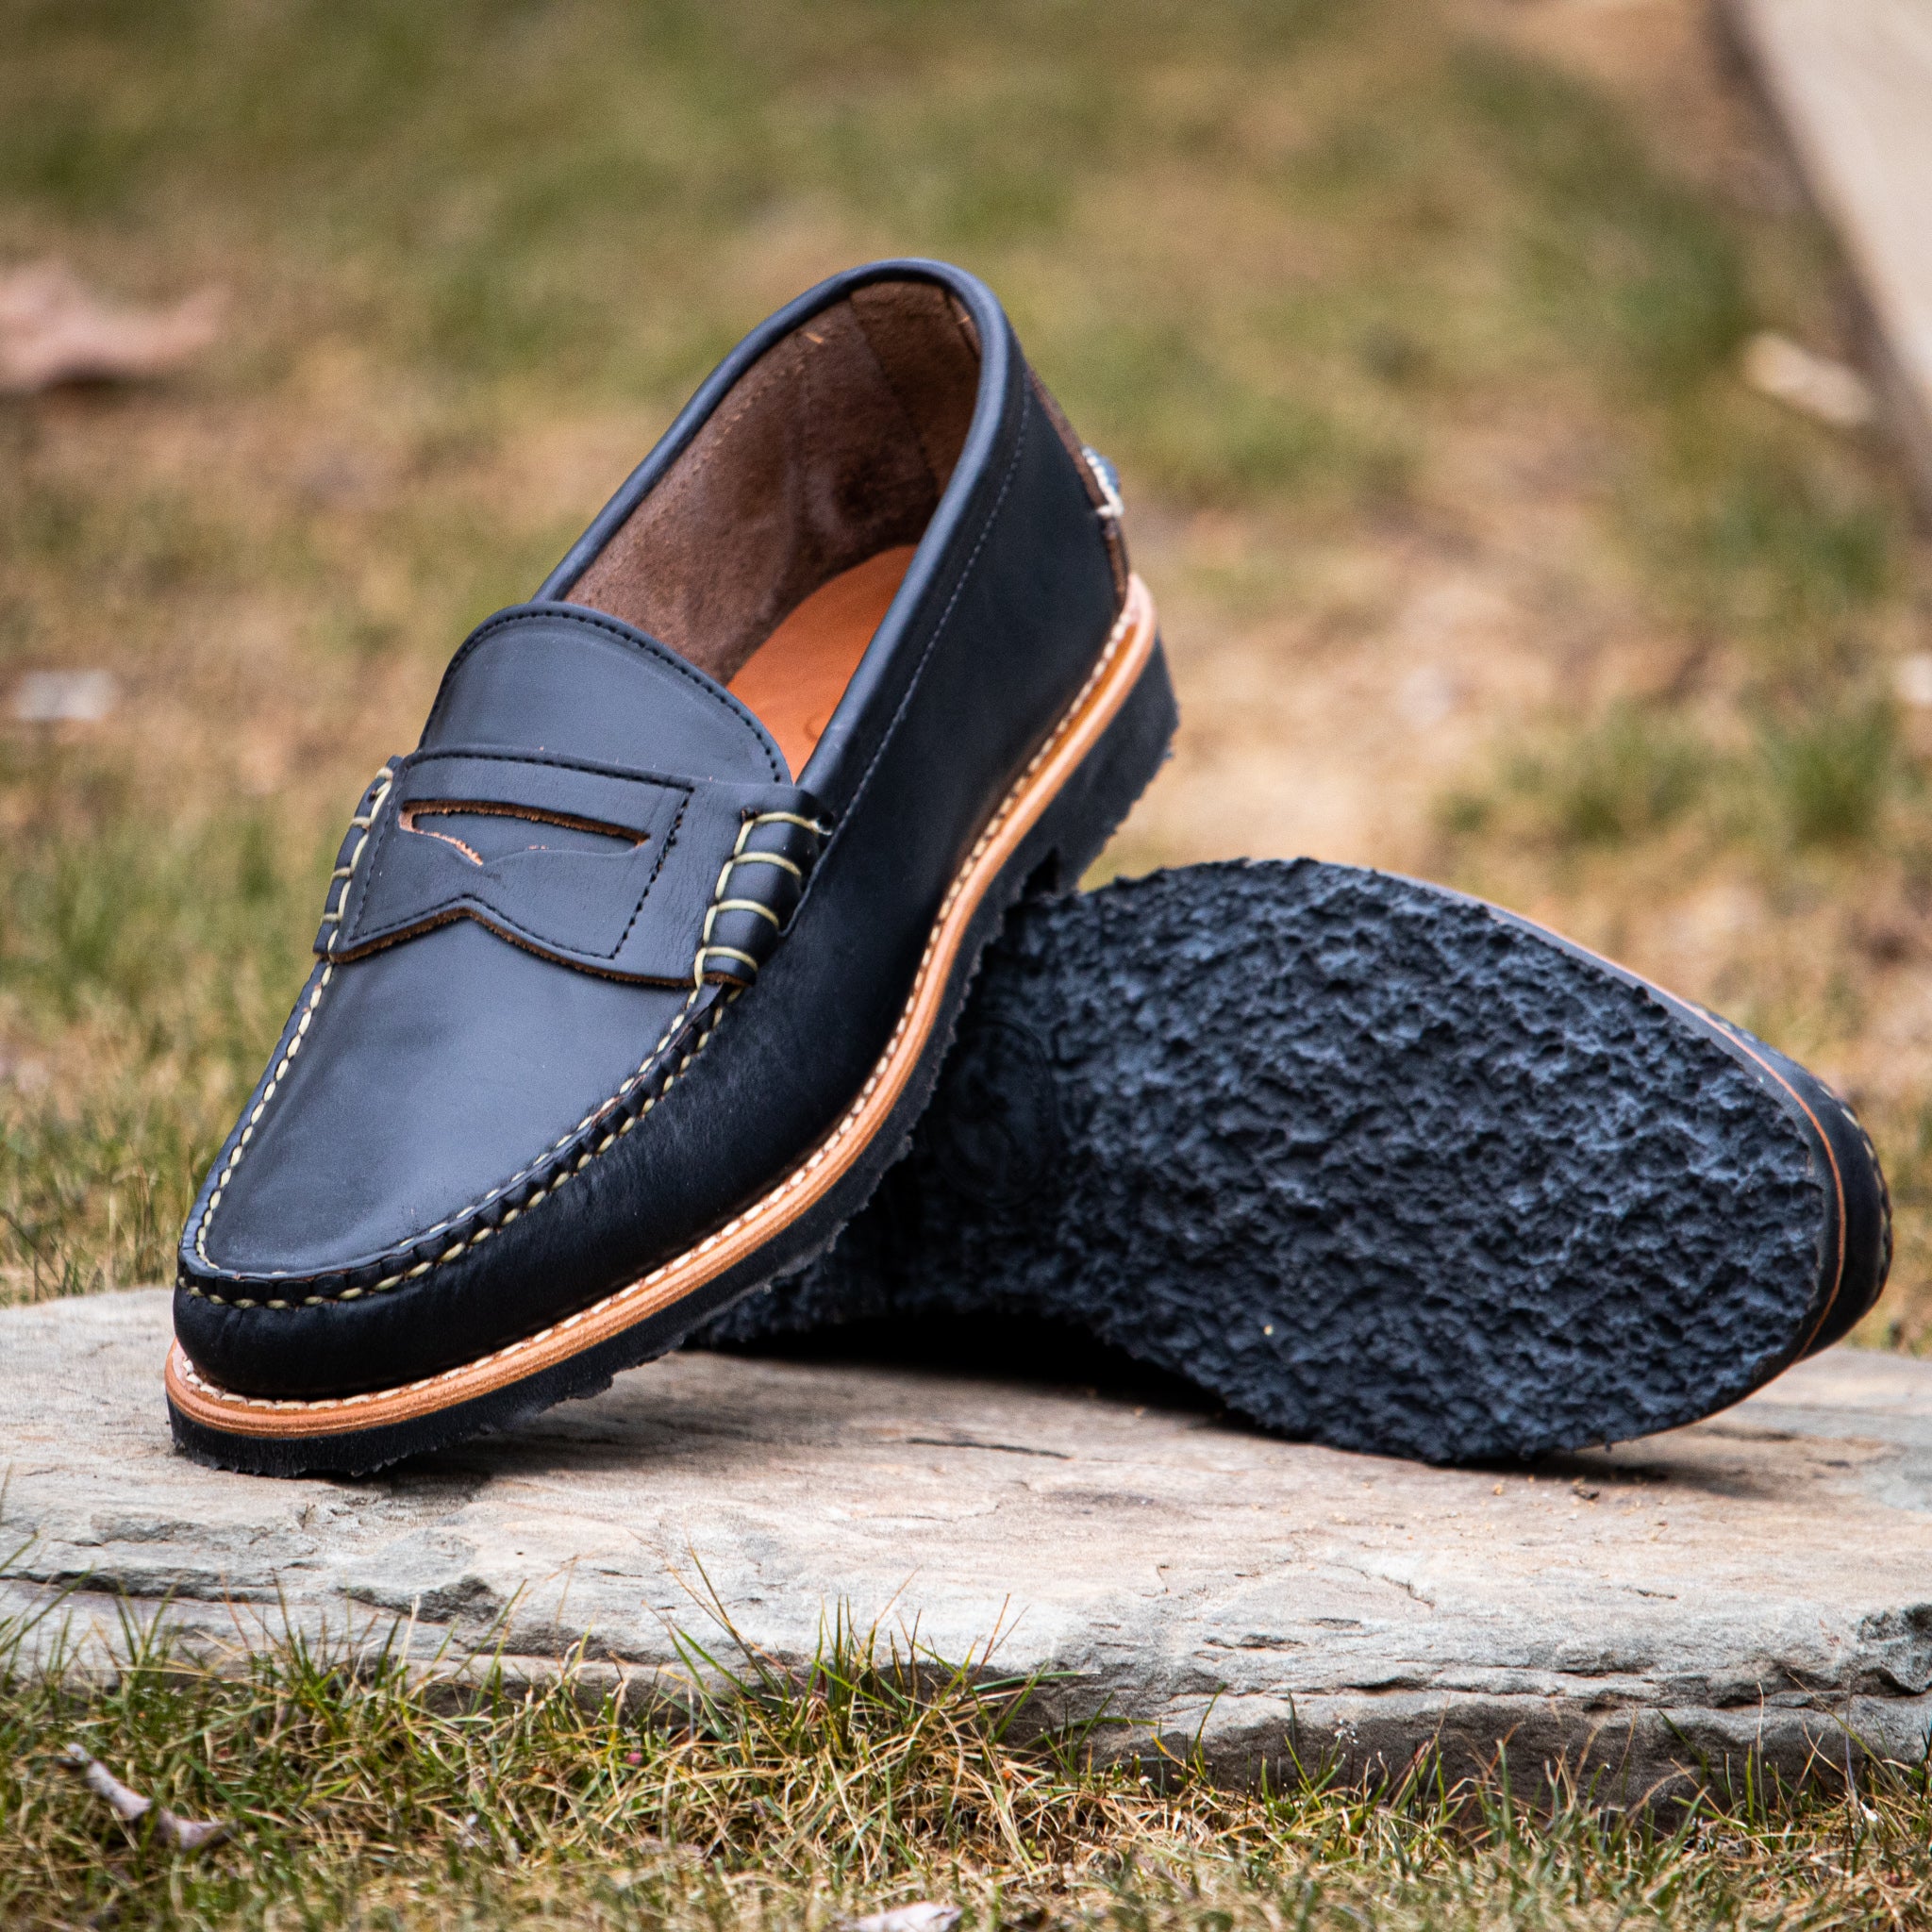 Pinch Penny Loafers - Black Chromexcel, Rancourt & Co.